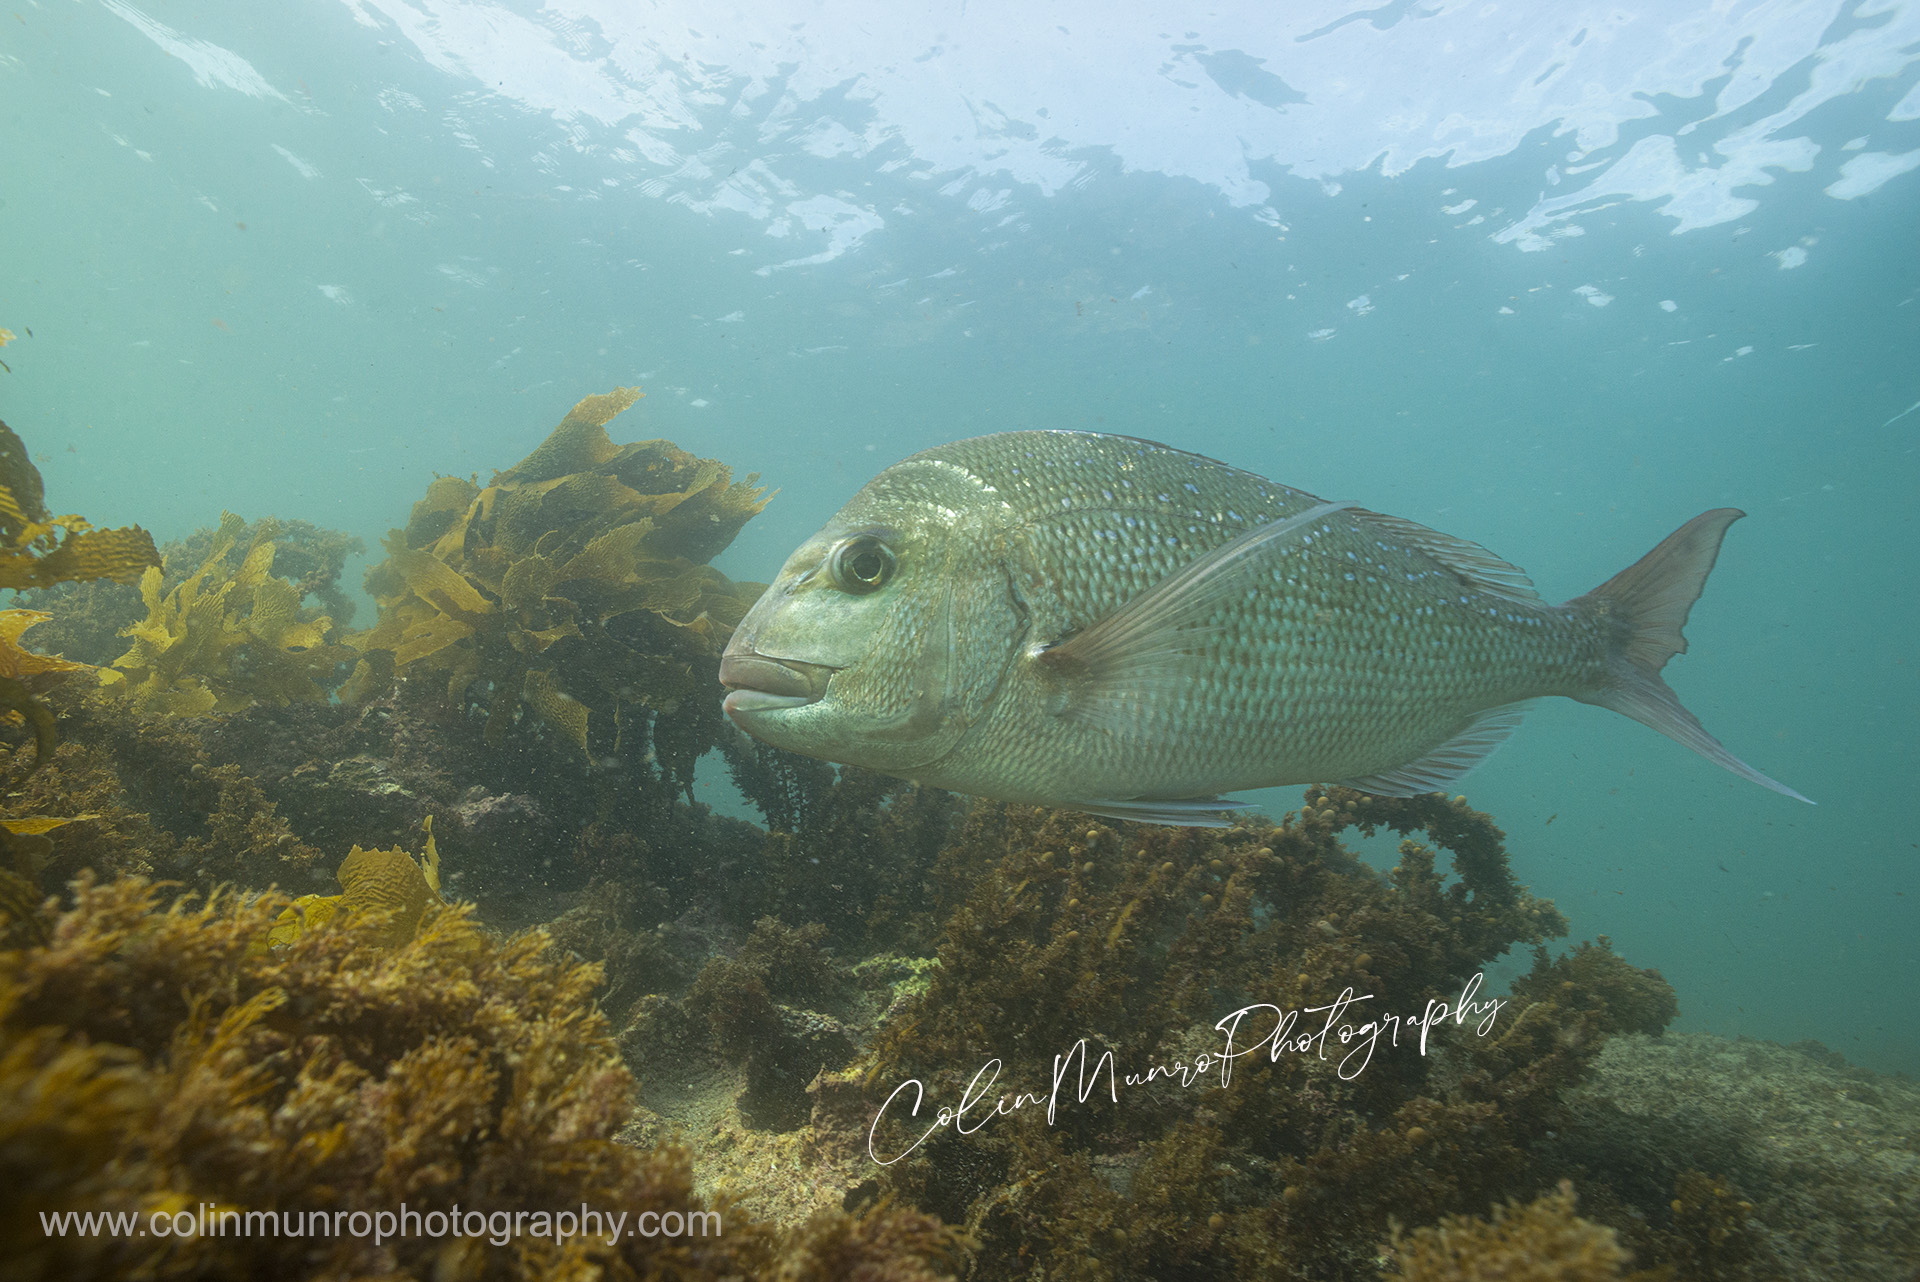 An Australasian snapper,Chrysophrys auratus, swims over kelp covered rocks, Goat Island Marine Reserve, New Zealand. @ Colin Munro Photography www.colinmunrophotography.com